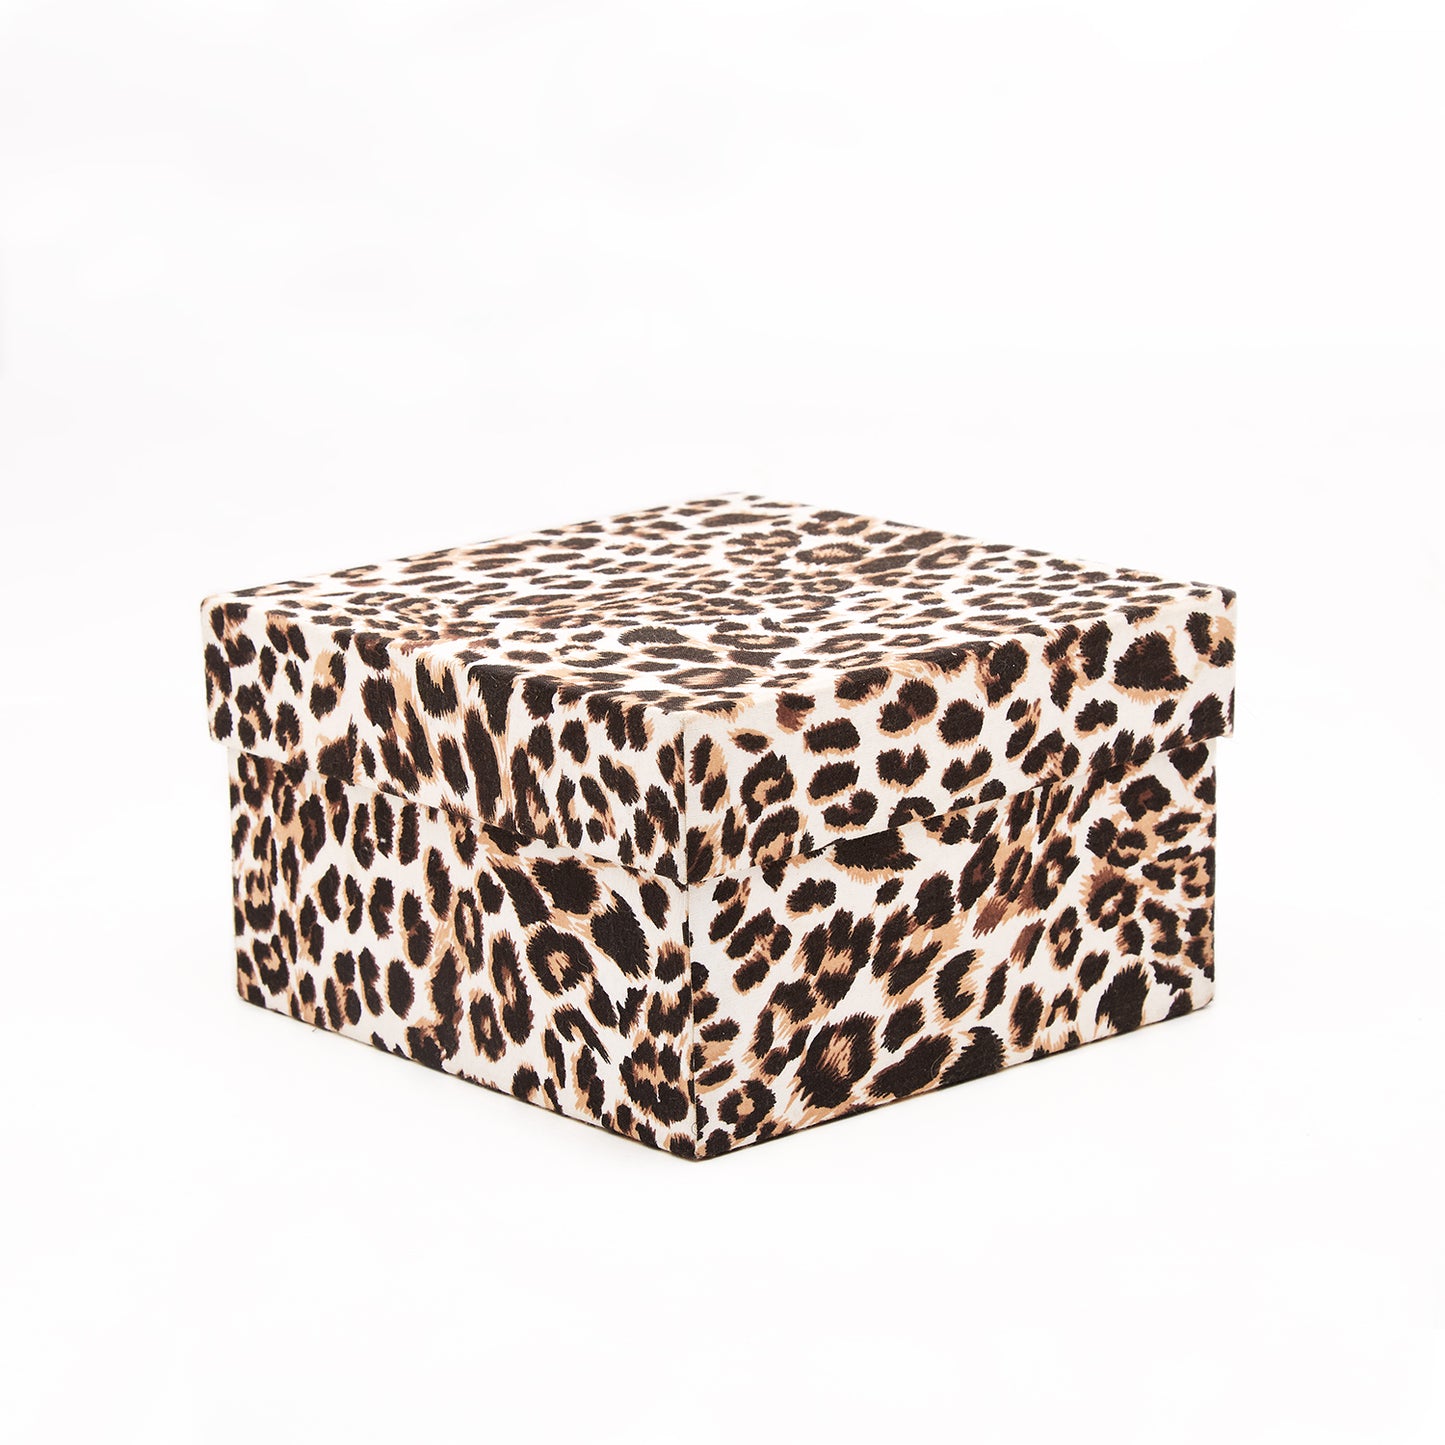 Leopard Design on a winter White - Gift Box Set of 5